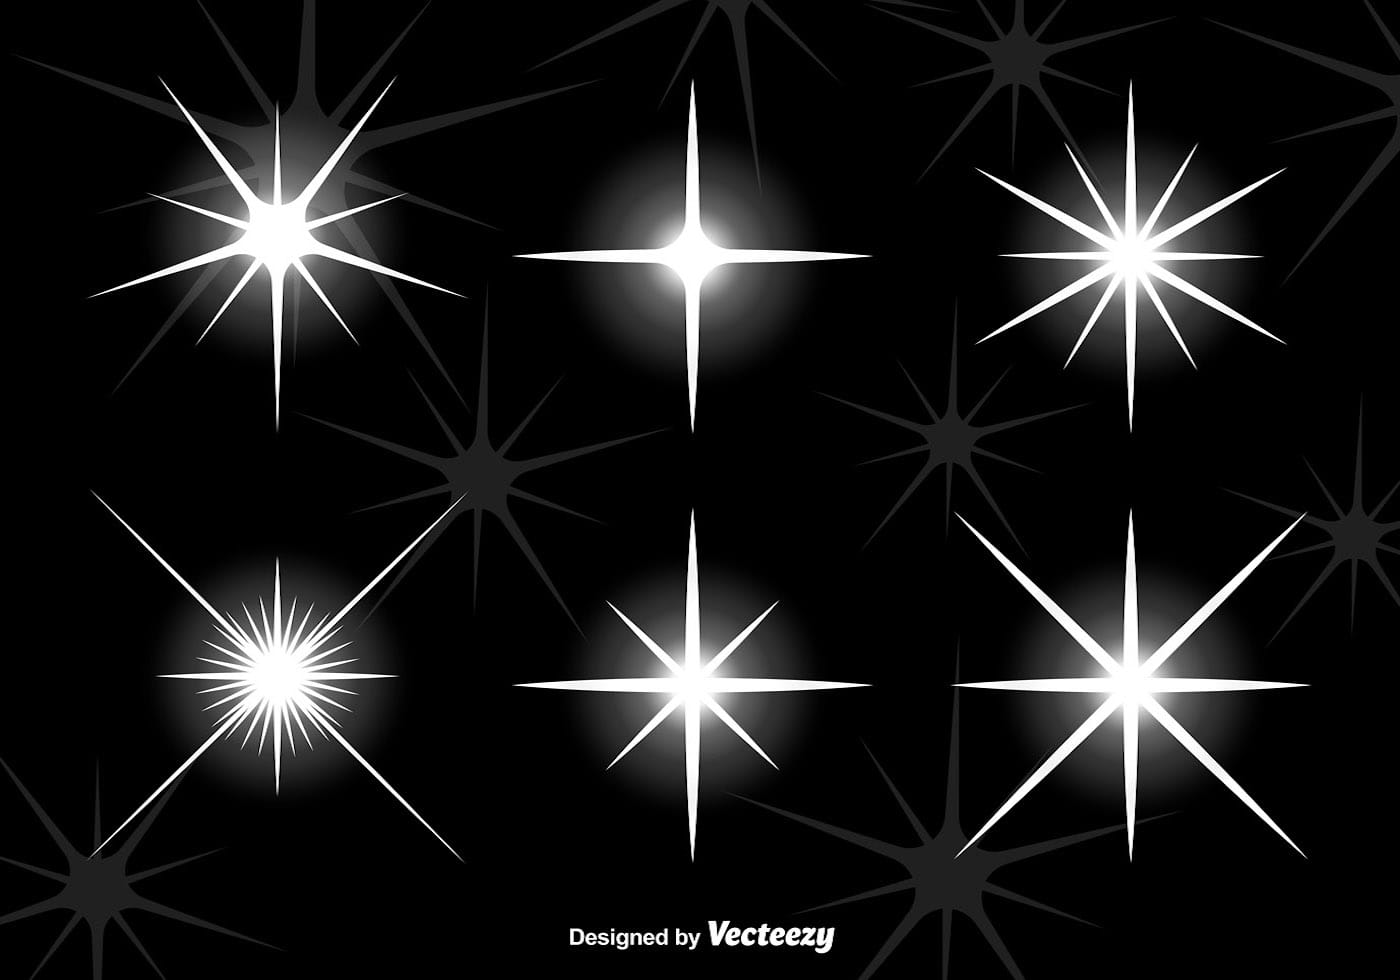 Bright star lights - Download Free Vector Art, Stock Graphics & Images